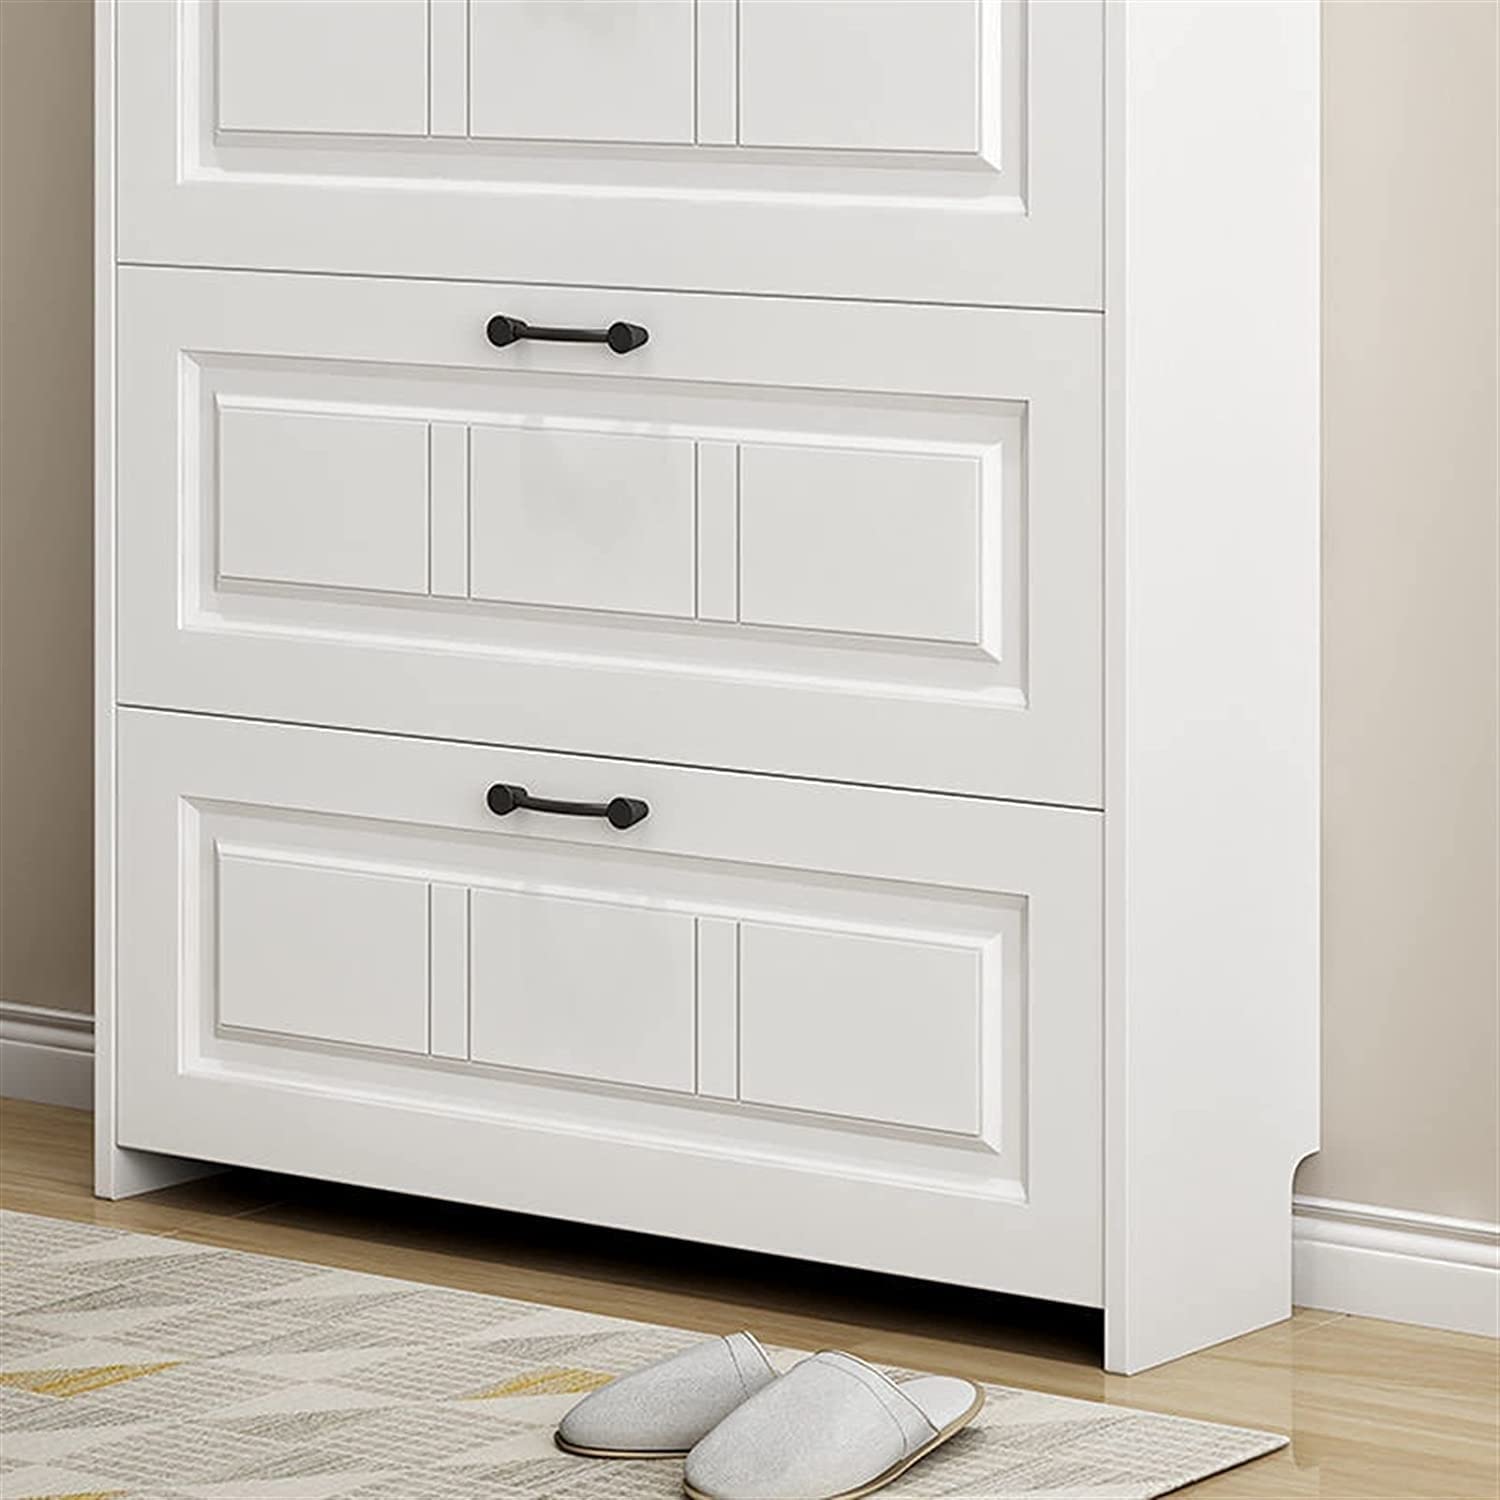 Space-Saving Secrets: Wall Hidden Shoe Cabinet - Conceal Your Shoes in Style! 🚪👠